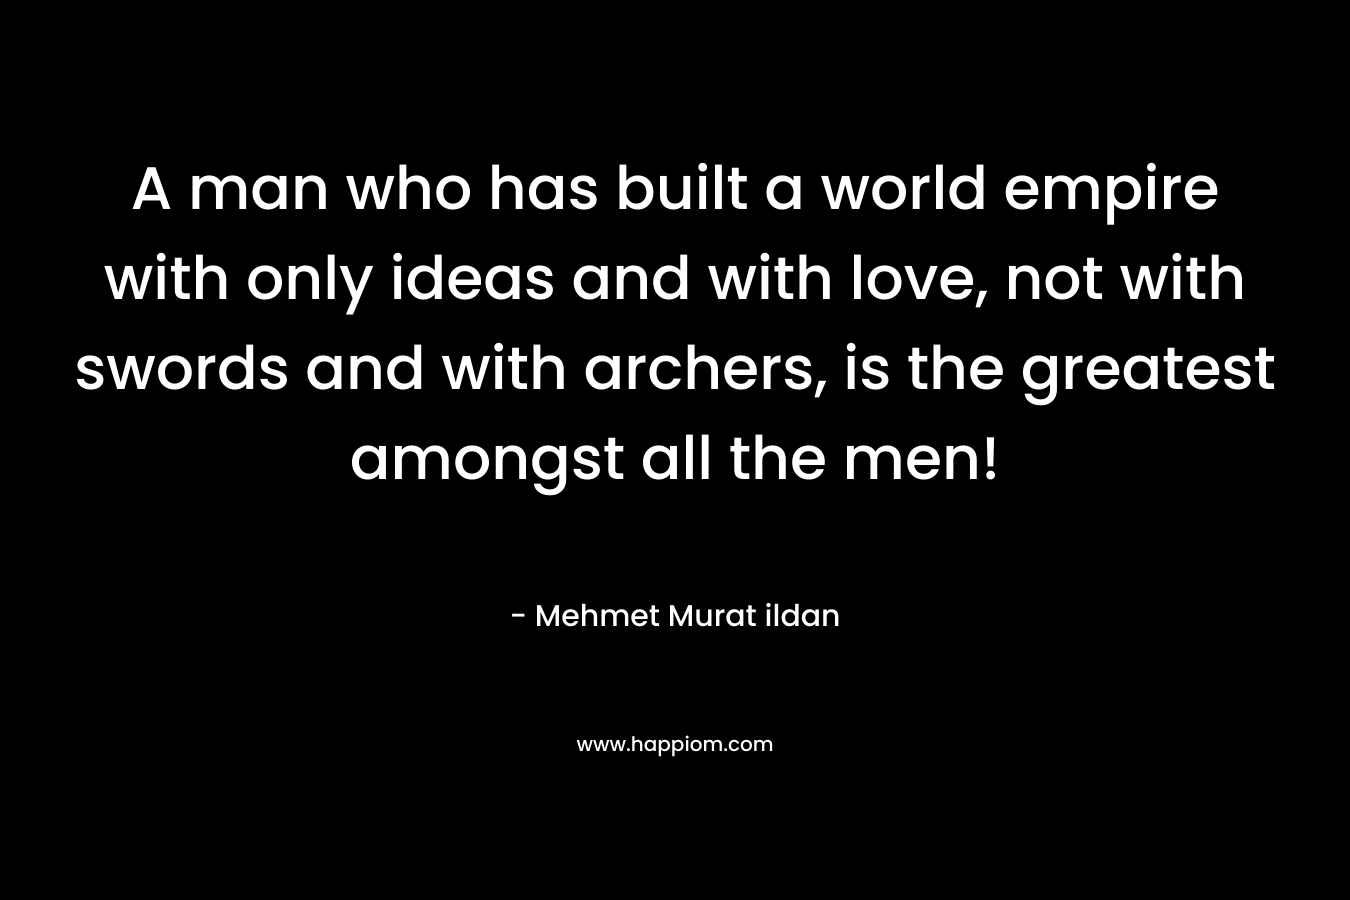 A man who has built a world empire with only ideas and with love, not with swords and with archers, is the greatest amongst all the men! – Mehmet Murat ildan